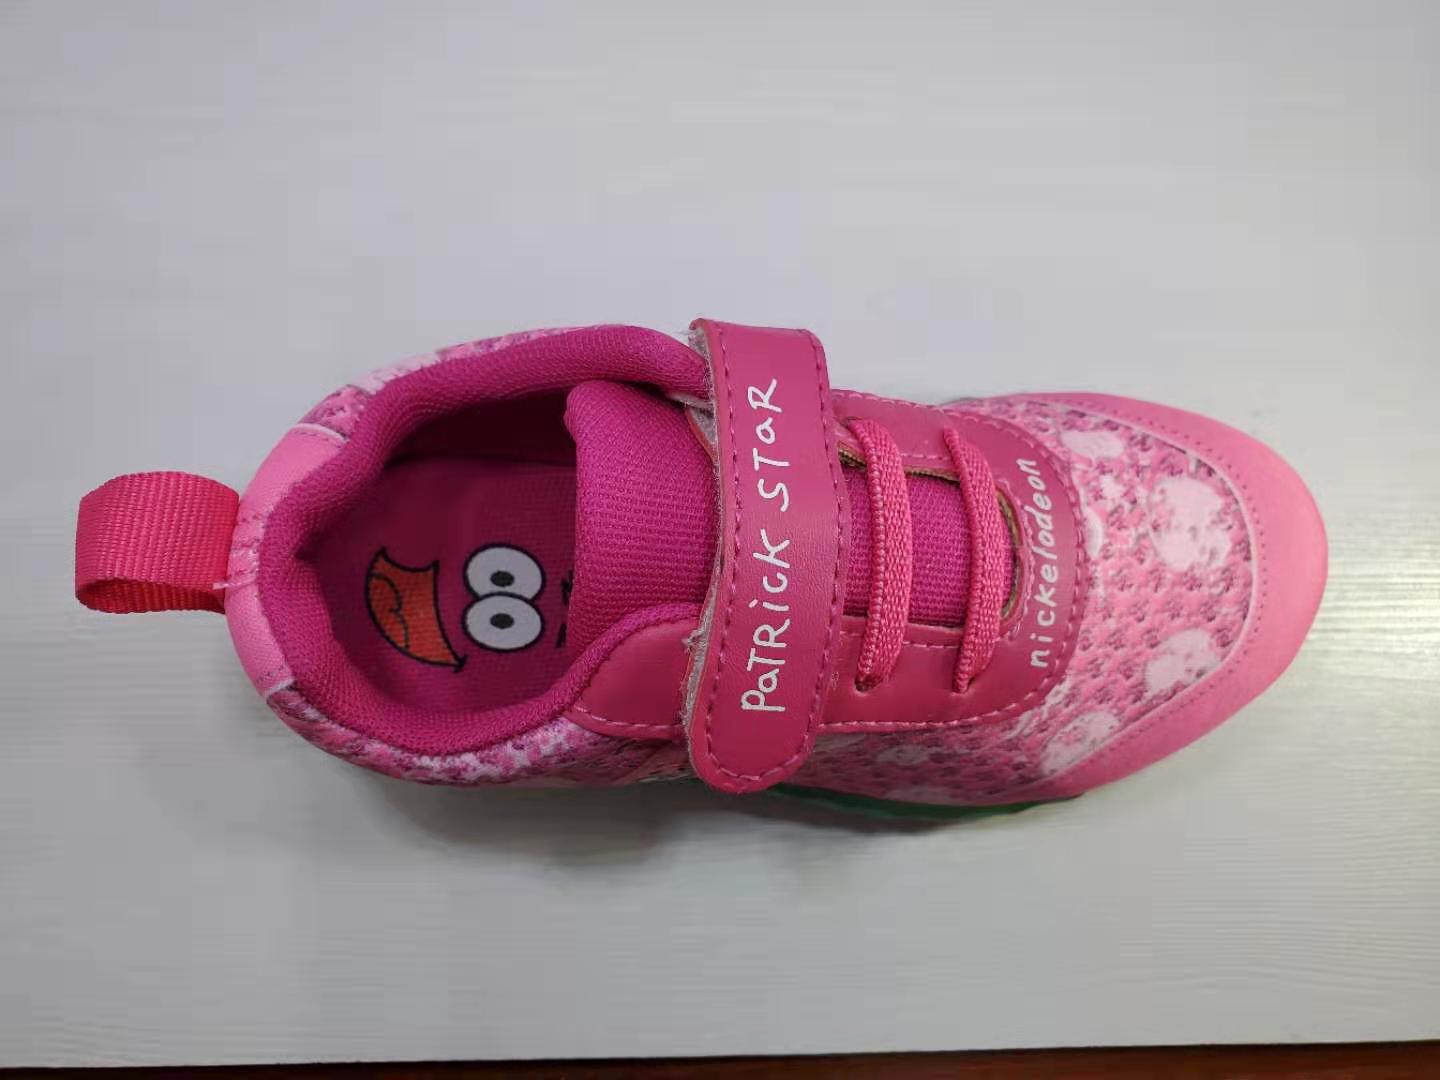 kyrie irving baby shoes